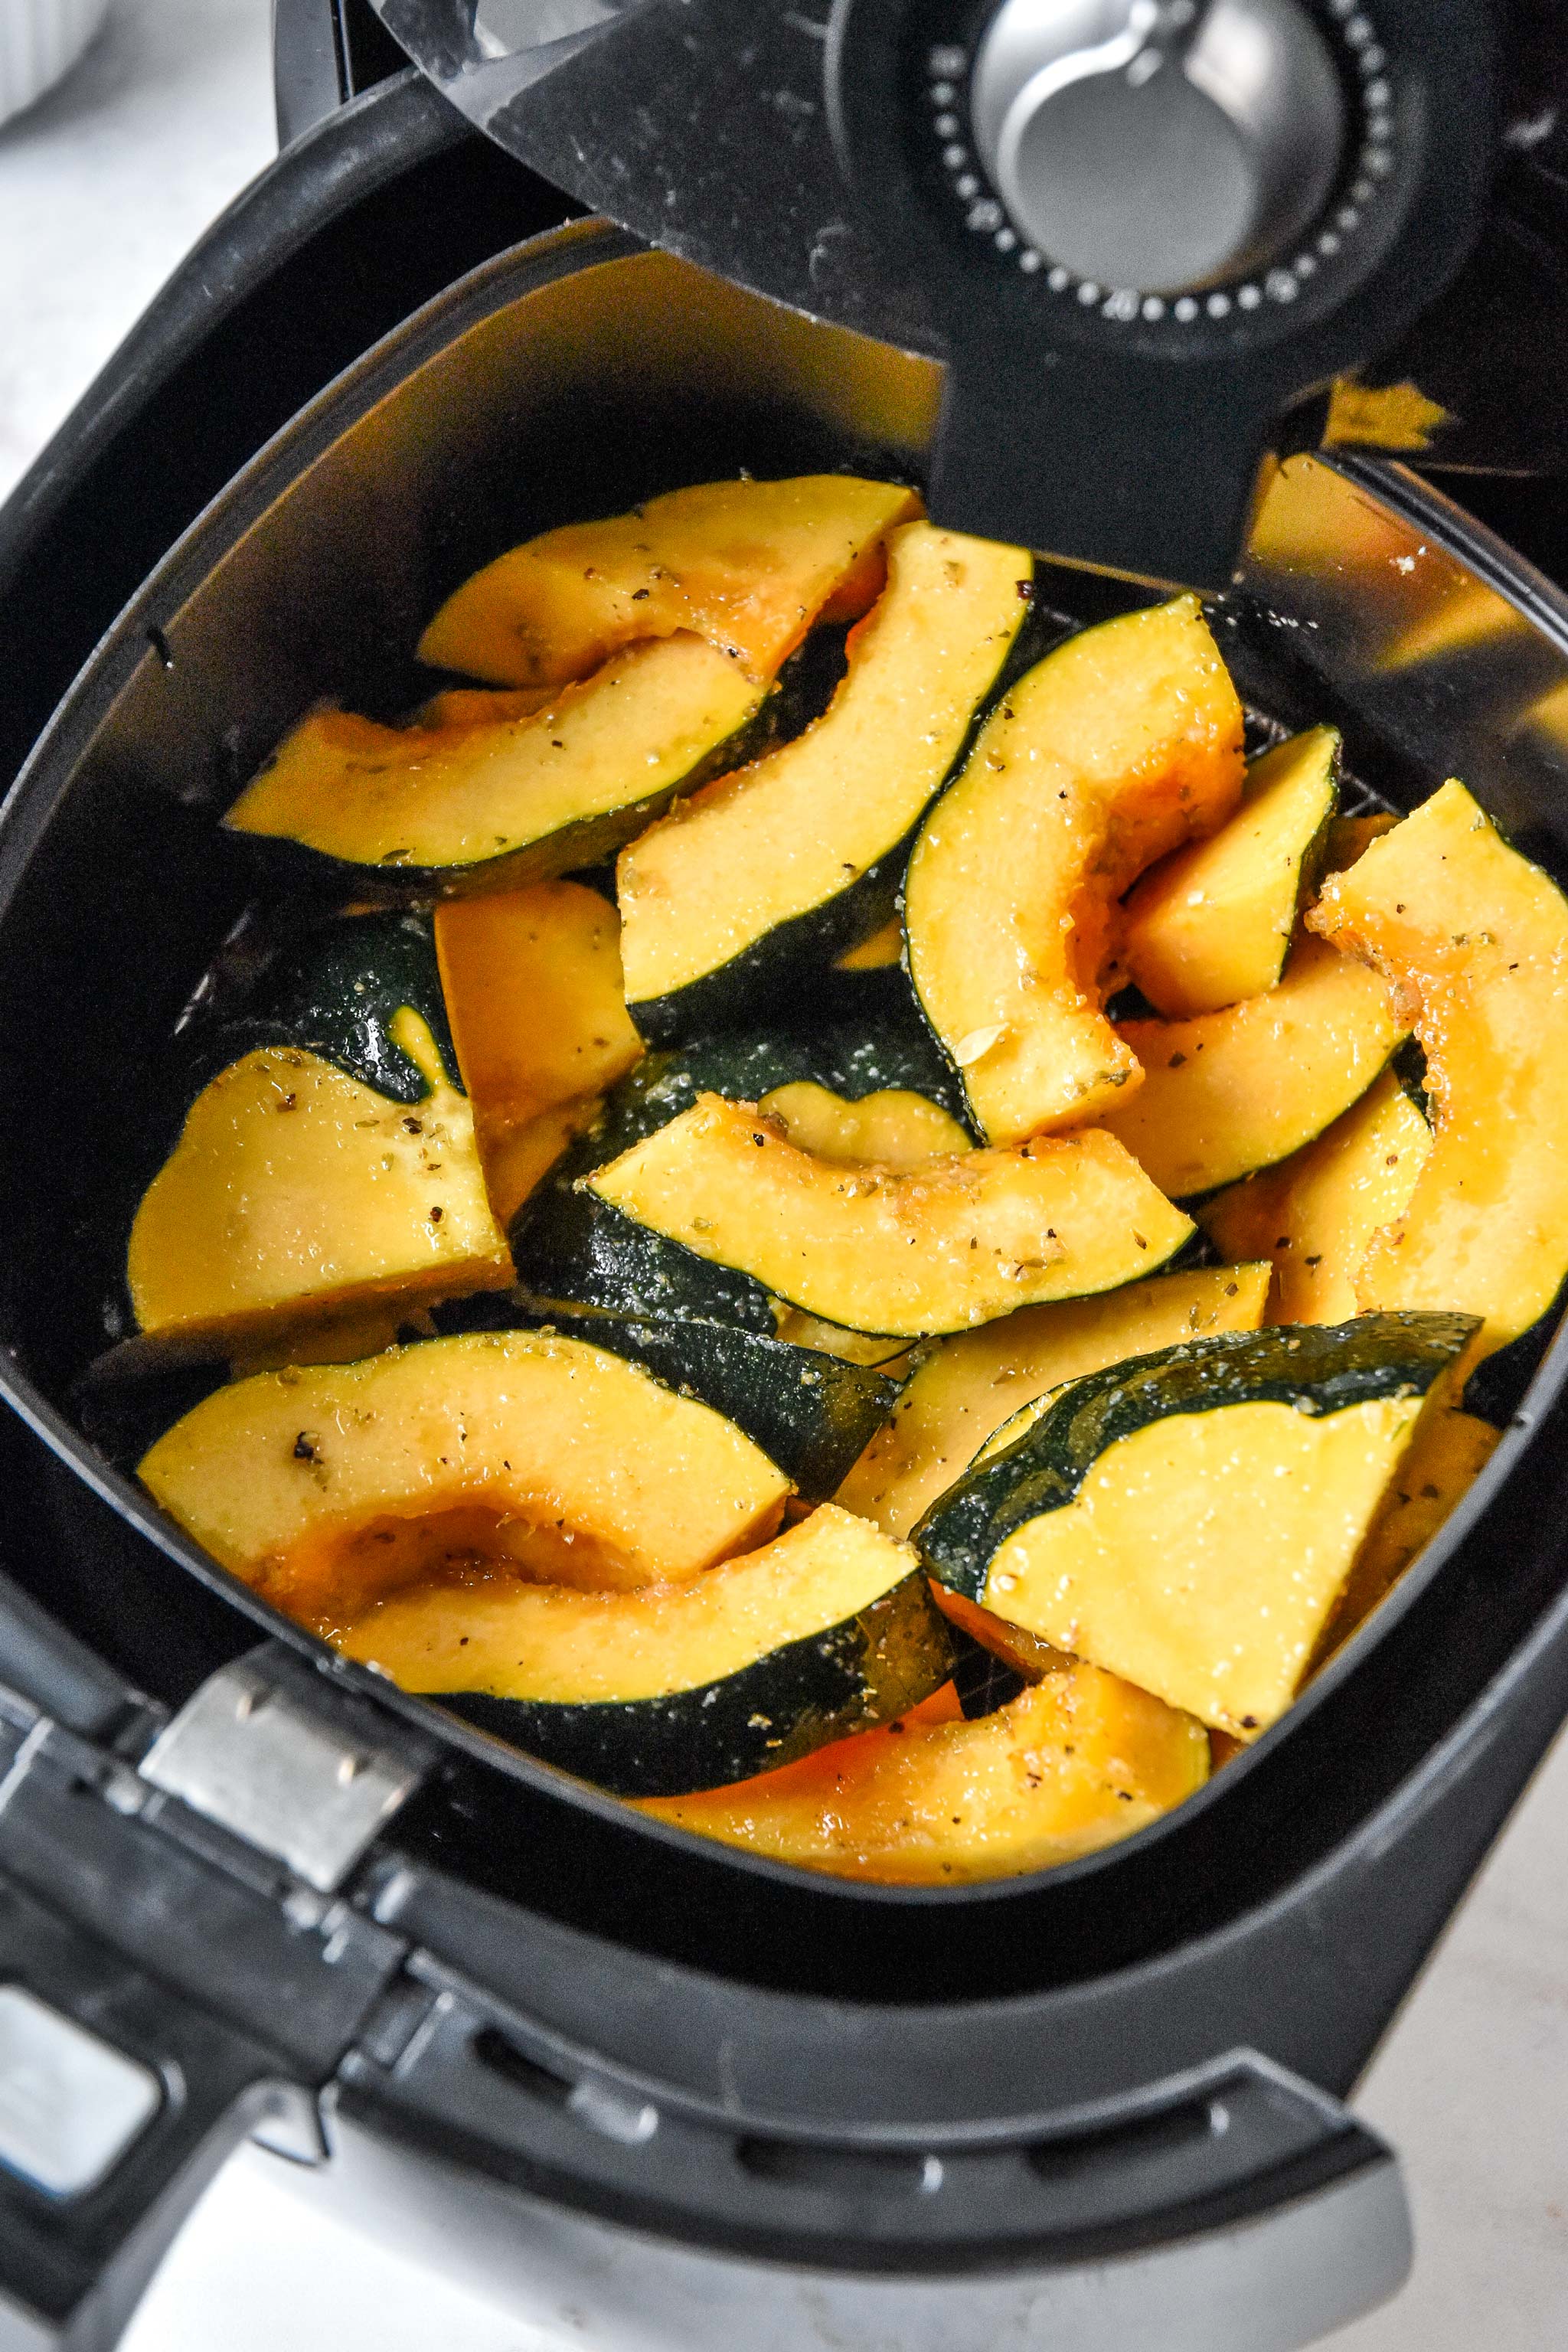 acorn squash in the air fryer ready to be cooked